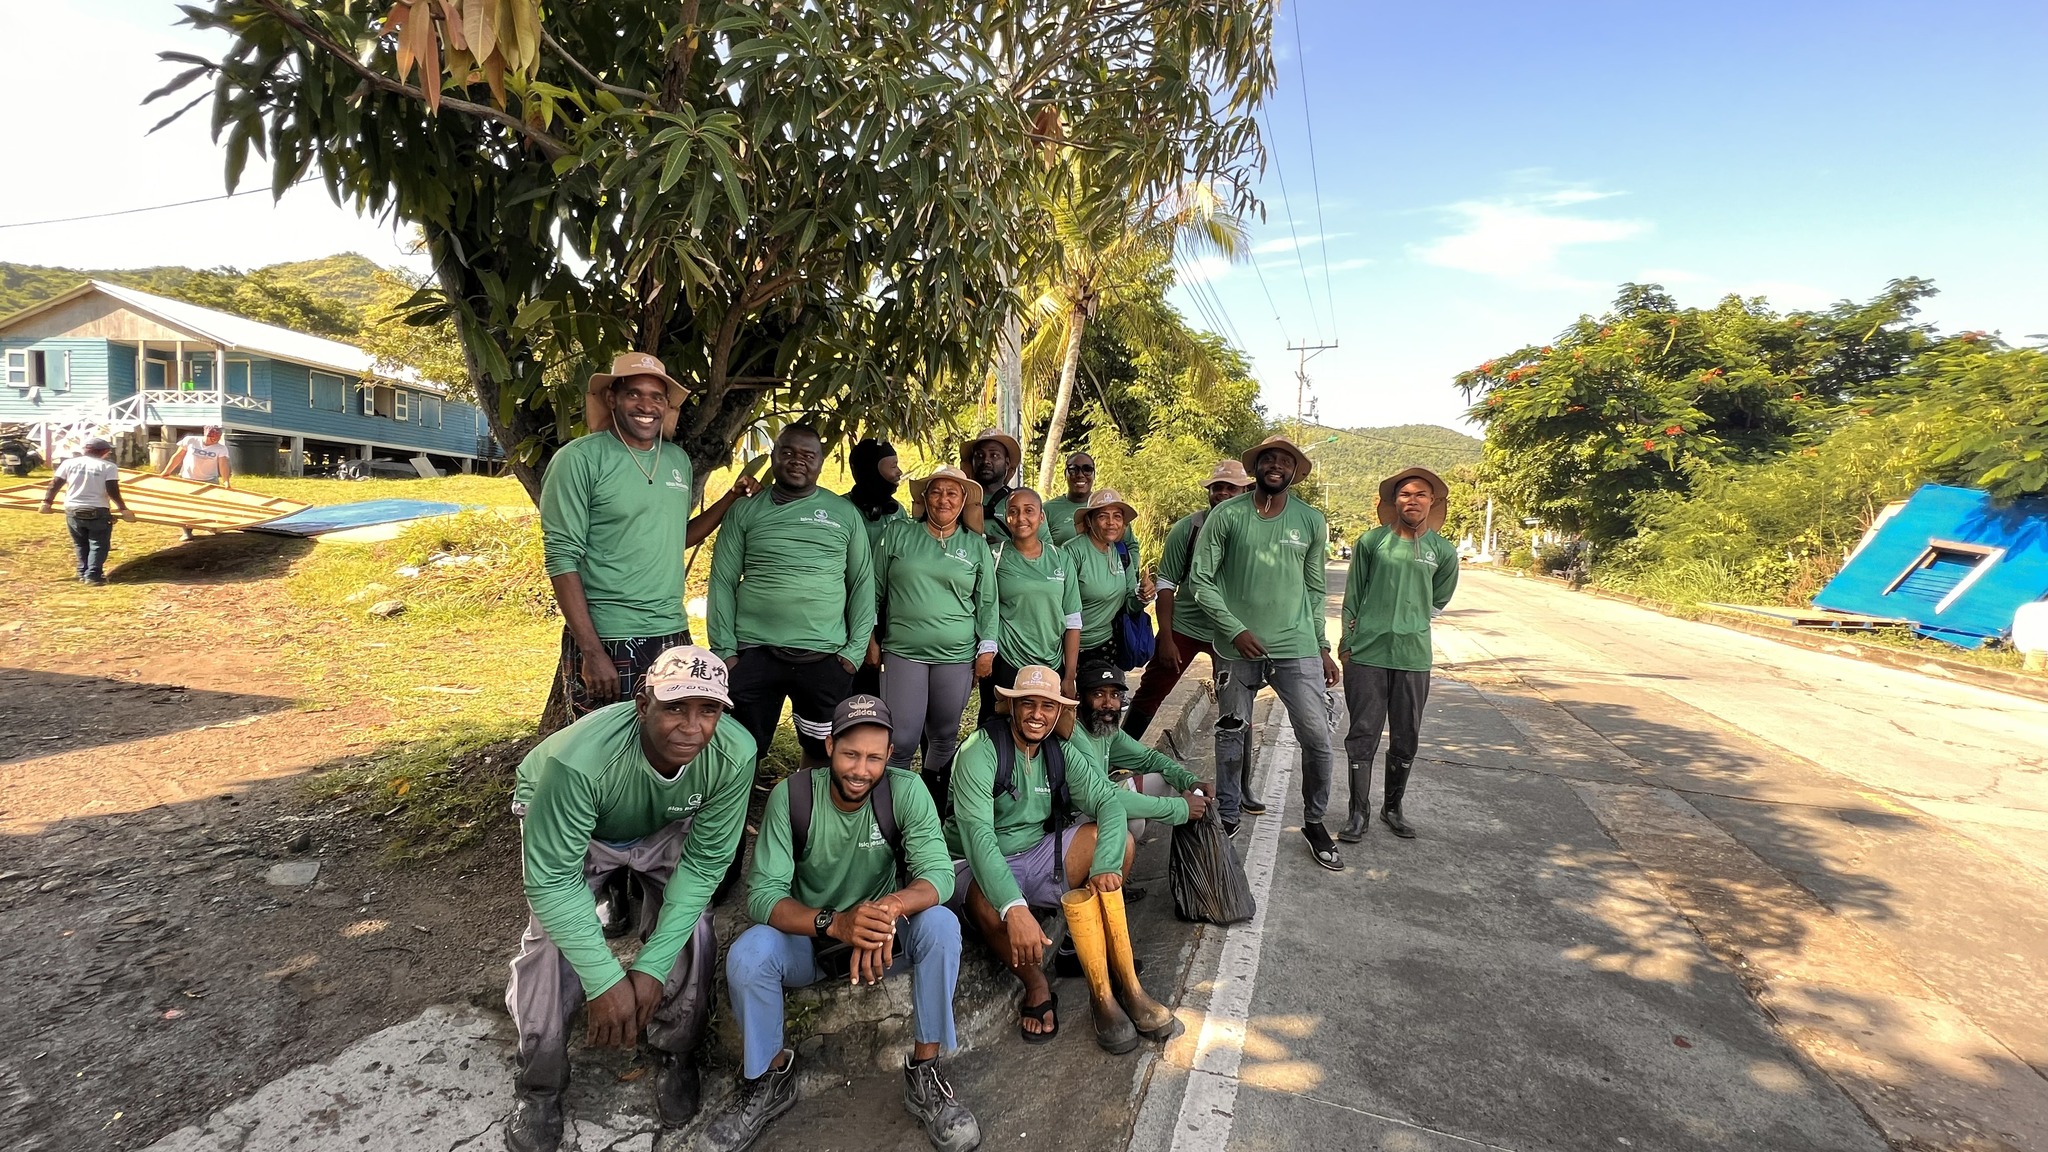 The purpose of agreement 004 of 2021 was focused on the residents of some Providencia neighborhoods playing an active role in the restoration of red mangroves.